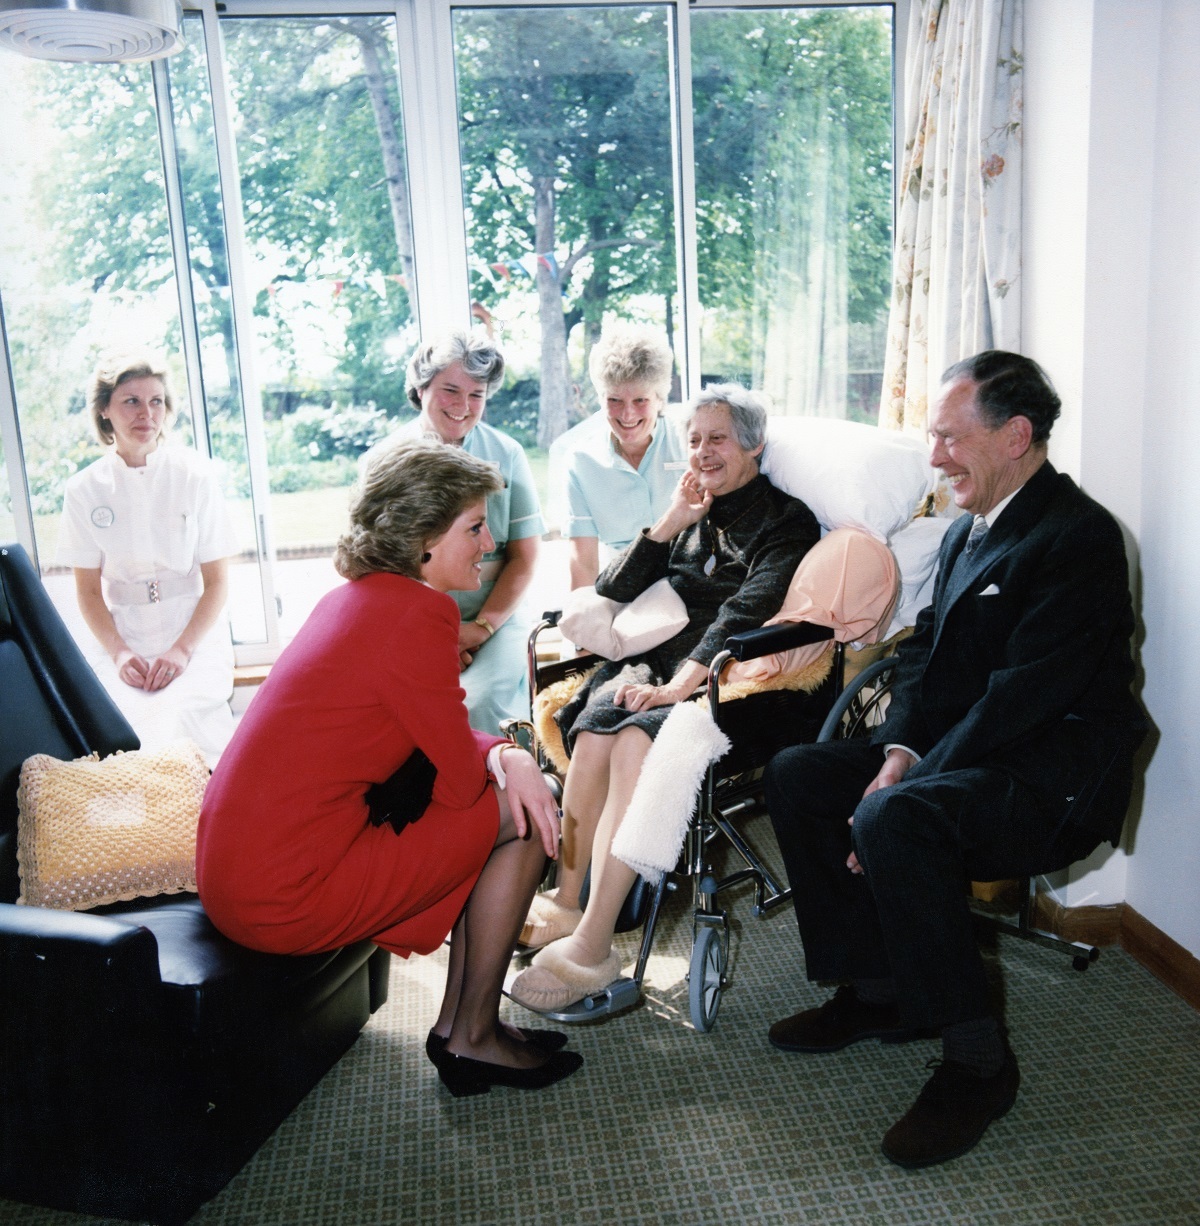 Smiles all round - the royal visitor sits down for a chat with a patient and family